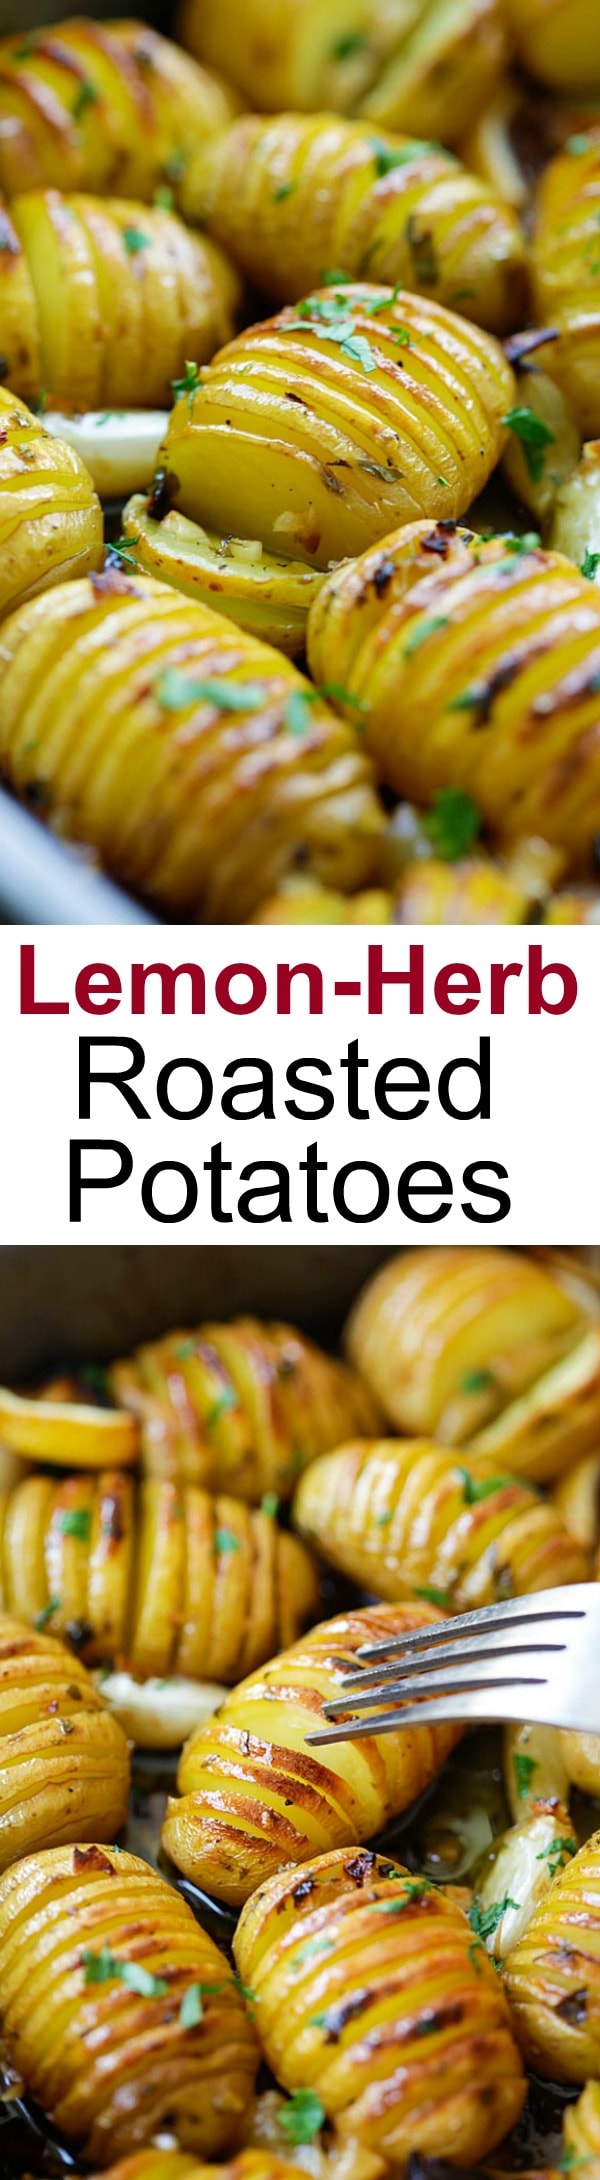 Lemon Herb Roasted Potatoes – BEST roasted potatoes you'll ever make, loaded with butter, lemon, garlic and herb. 15 mins active time! | rasamalaysia.com